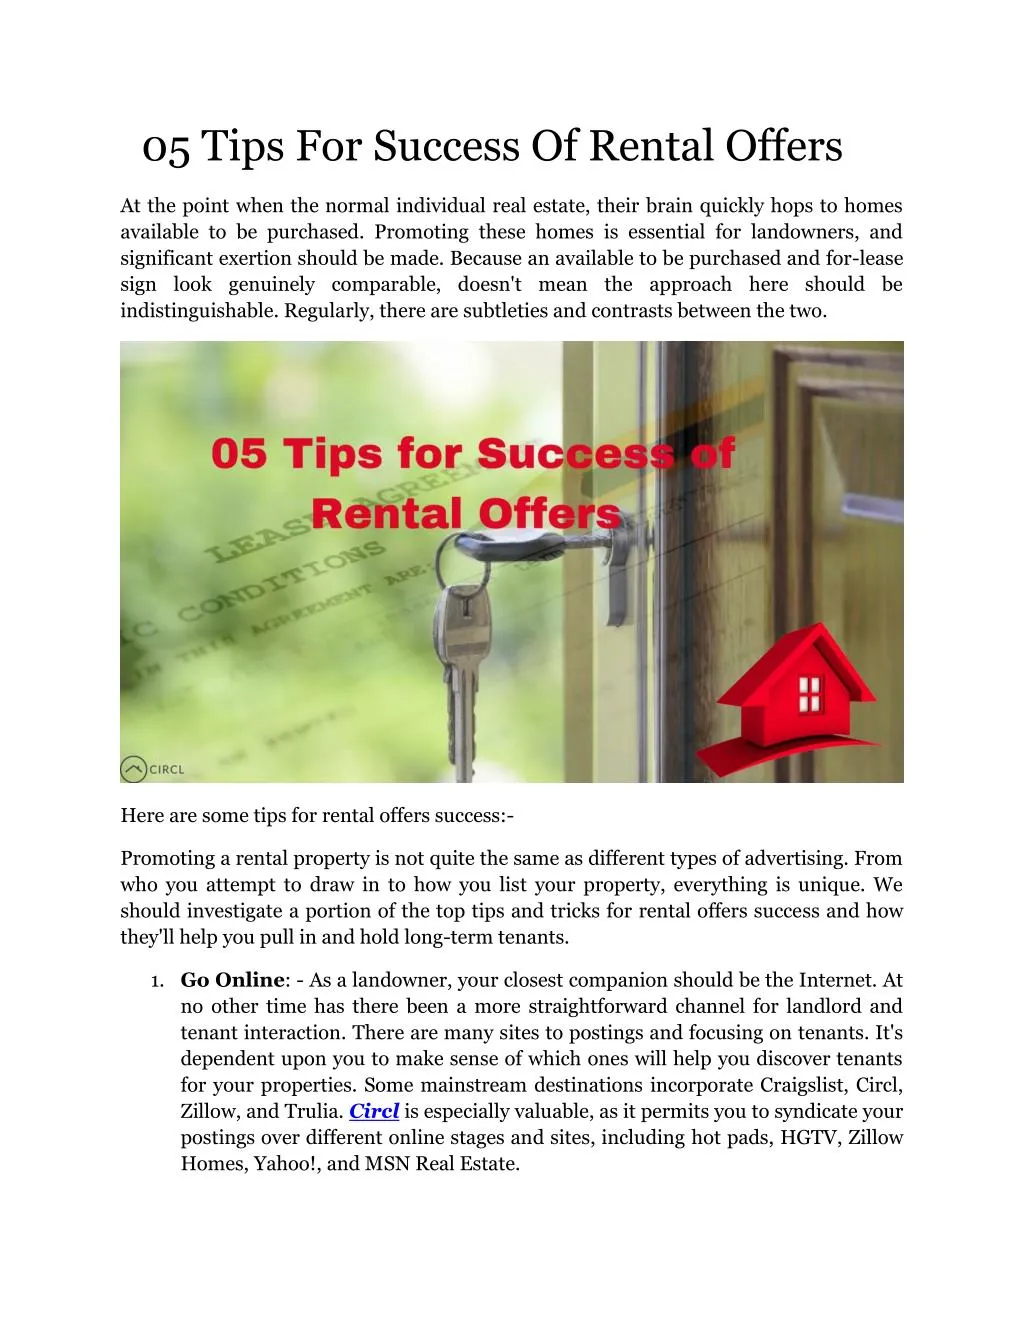 05 tips for success of rental offers